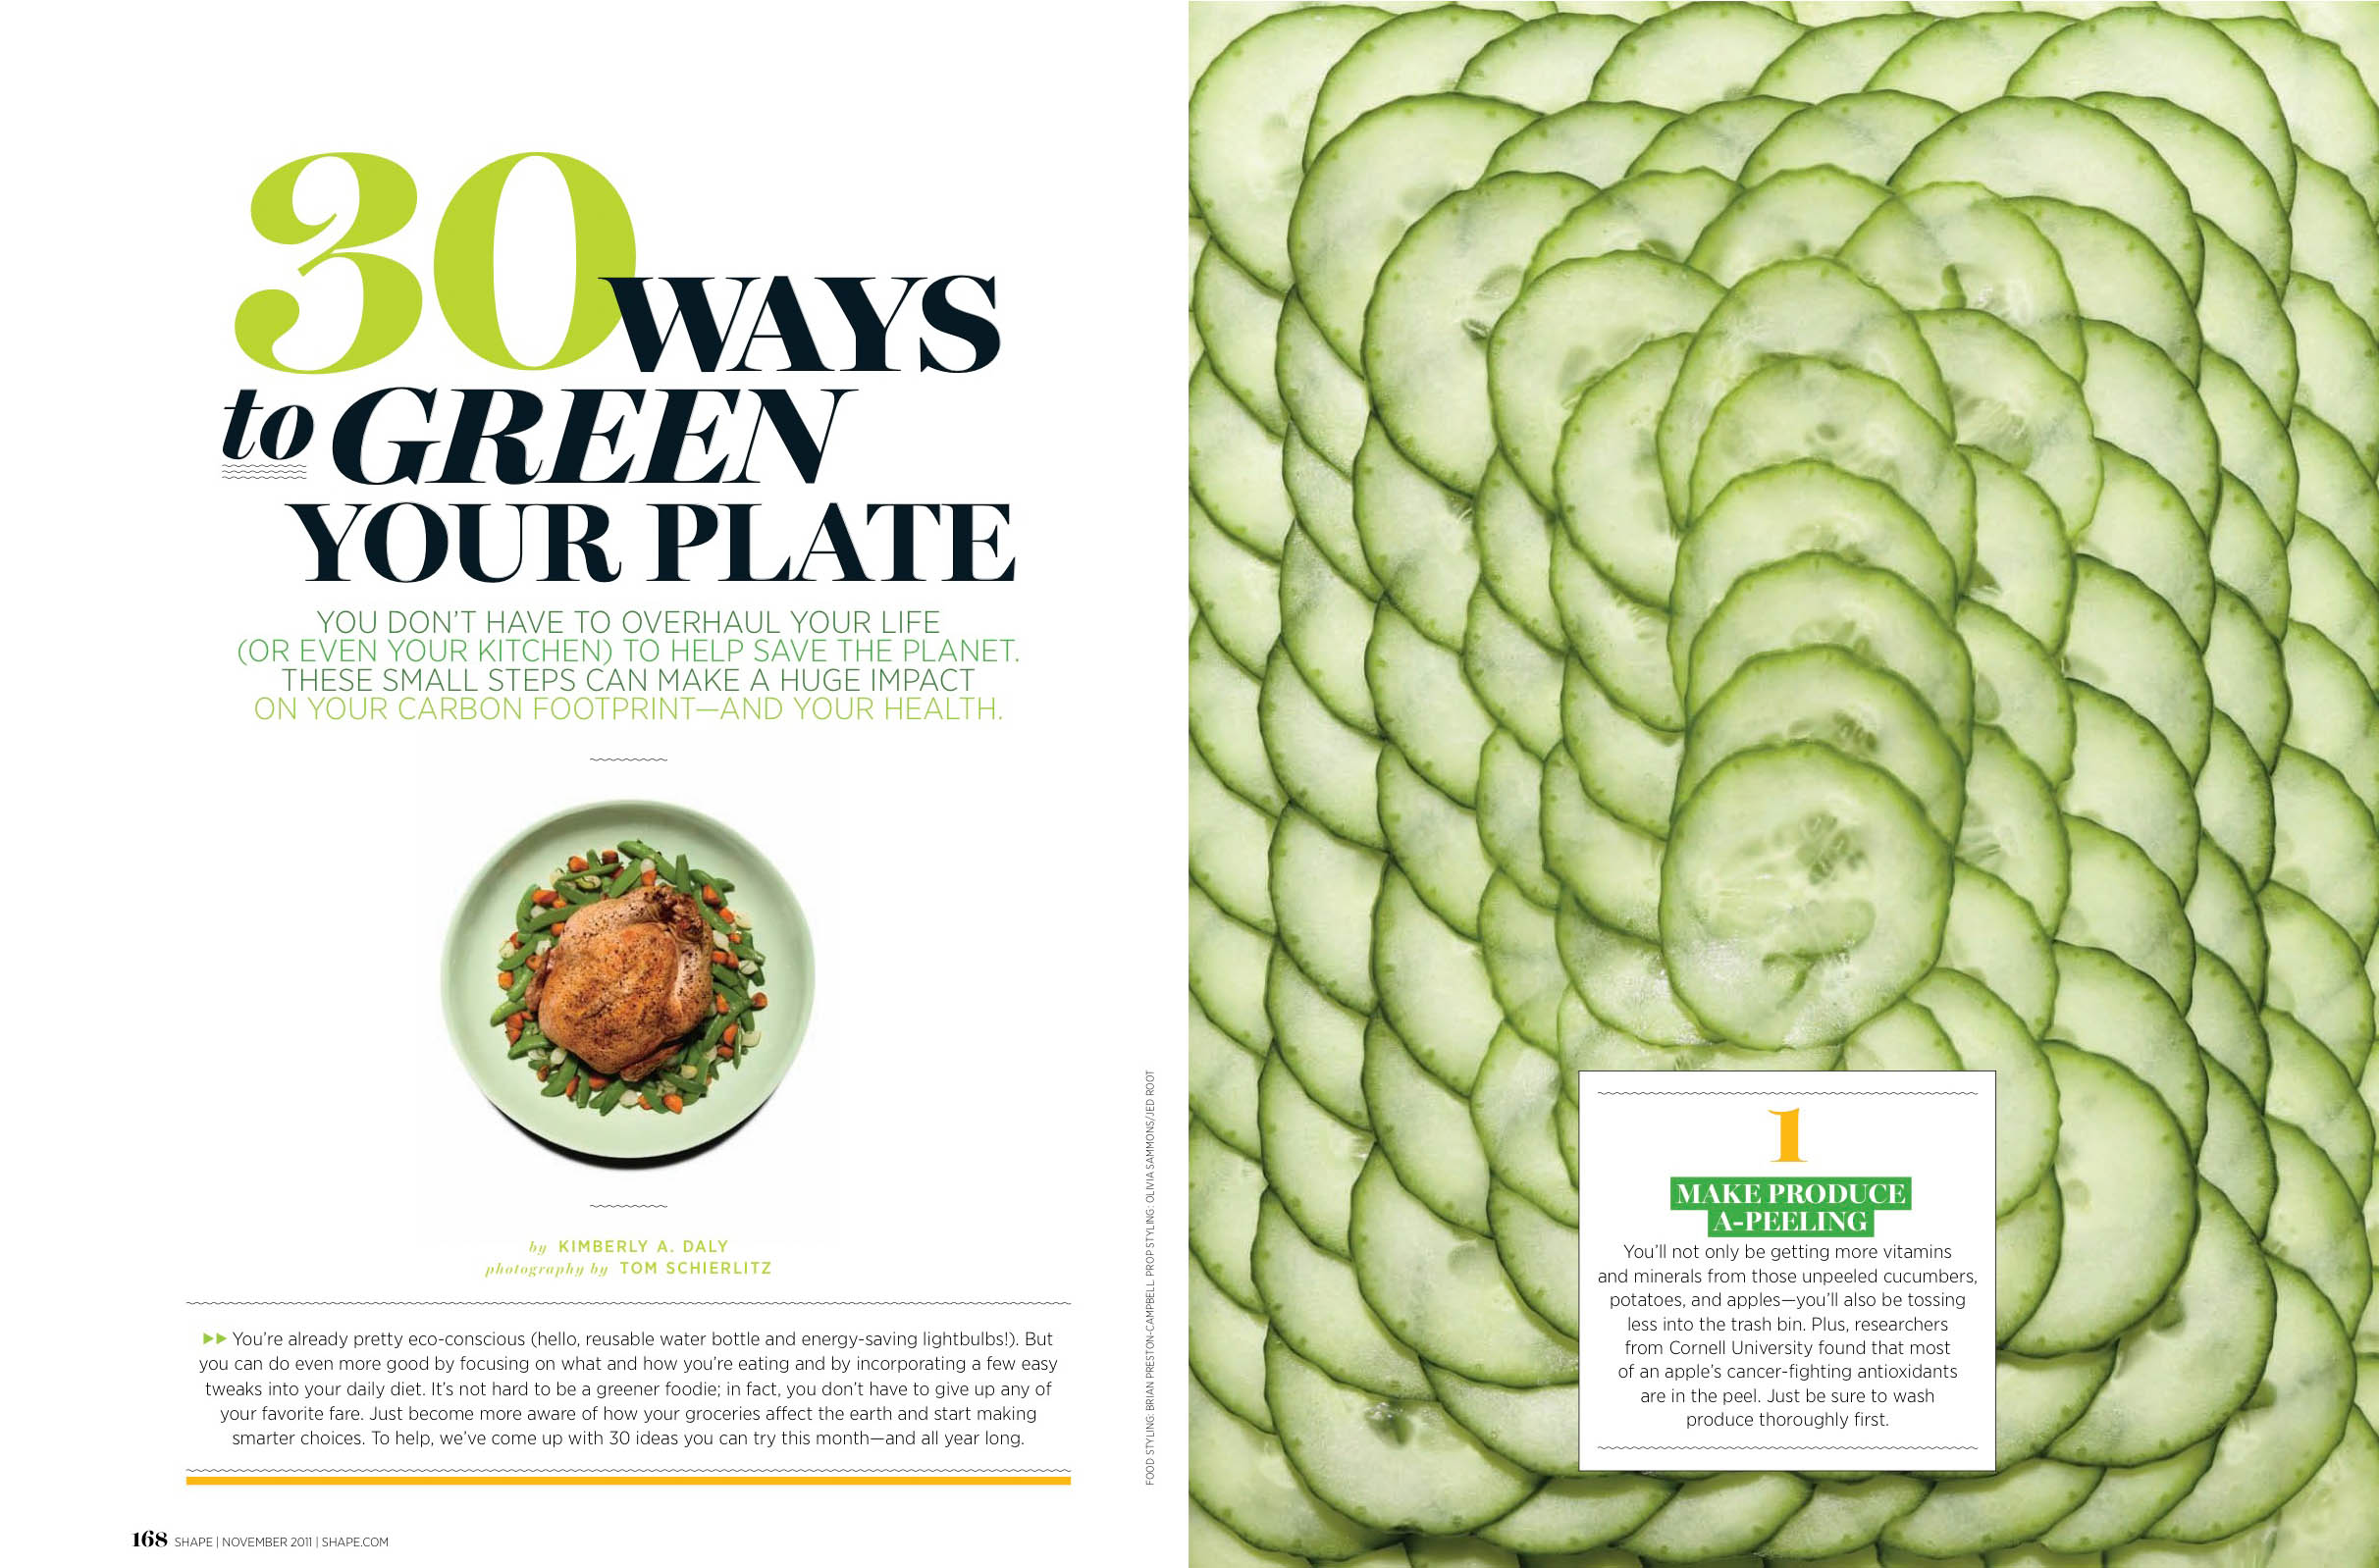 30 Ways to Green Your Plate, November 2011